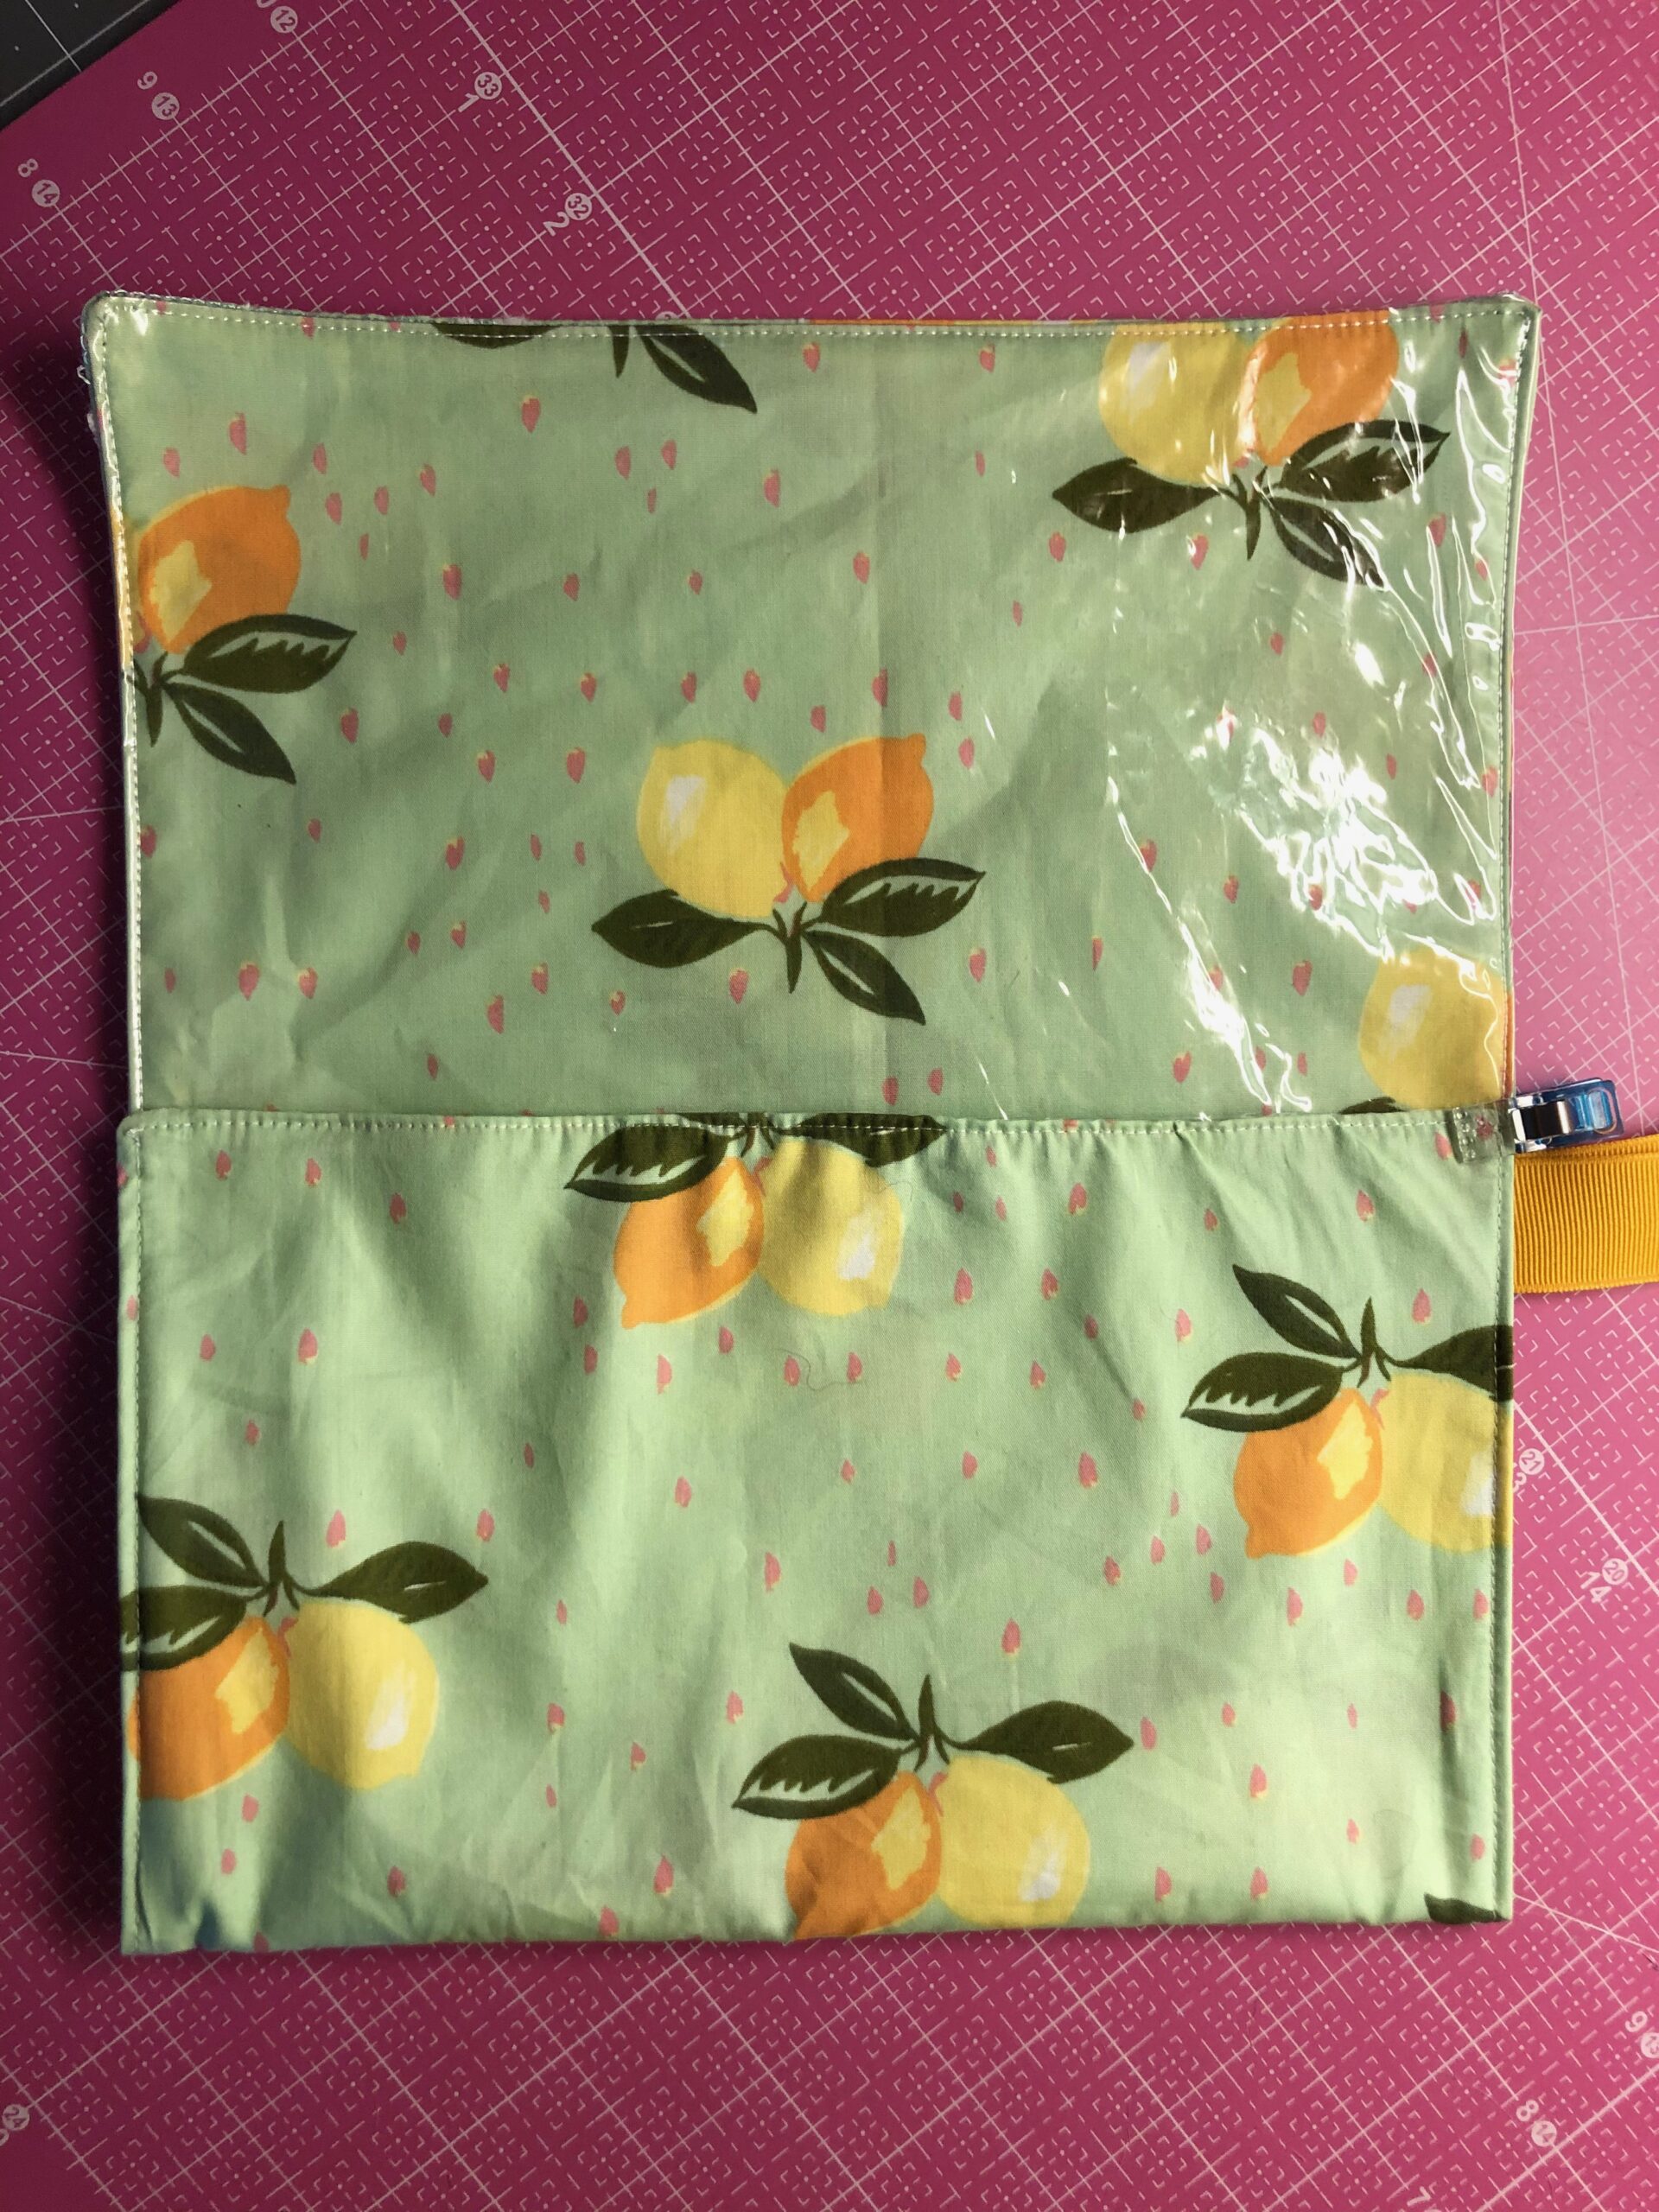 A Little Bit Fancier Brush Roll Up – The Daily Sew